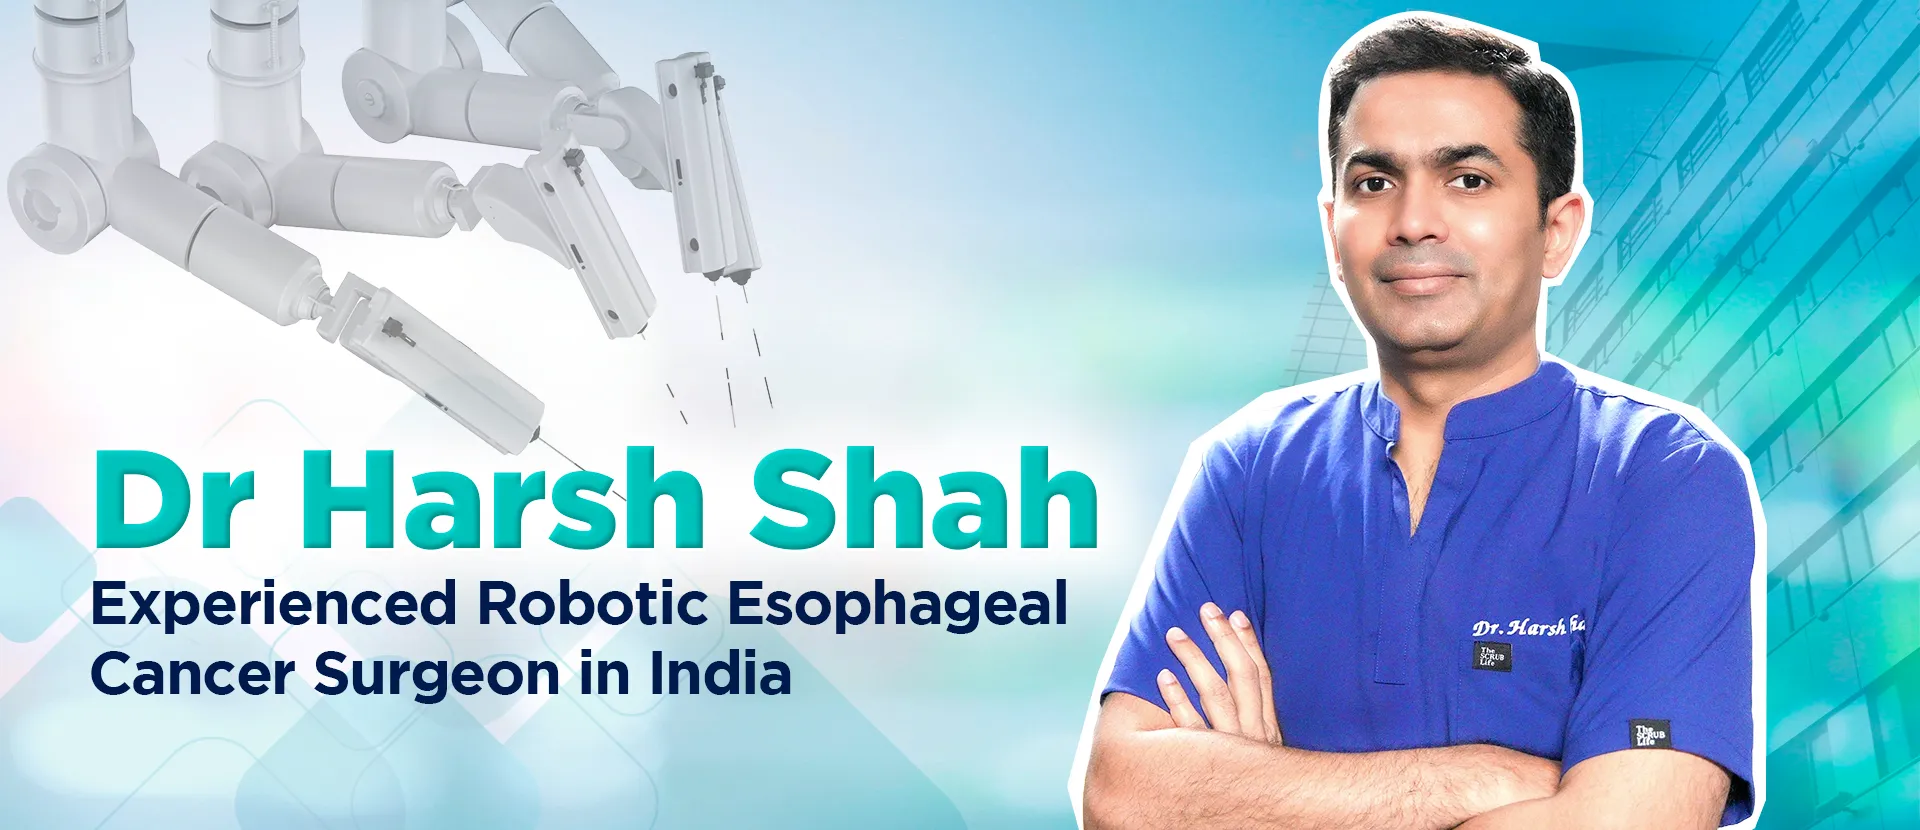 Best robotic esophageal cancer surgeon and esophageal cancer hospital in Ahmedabad